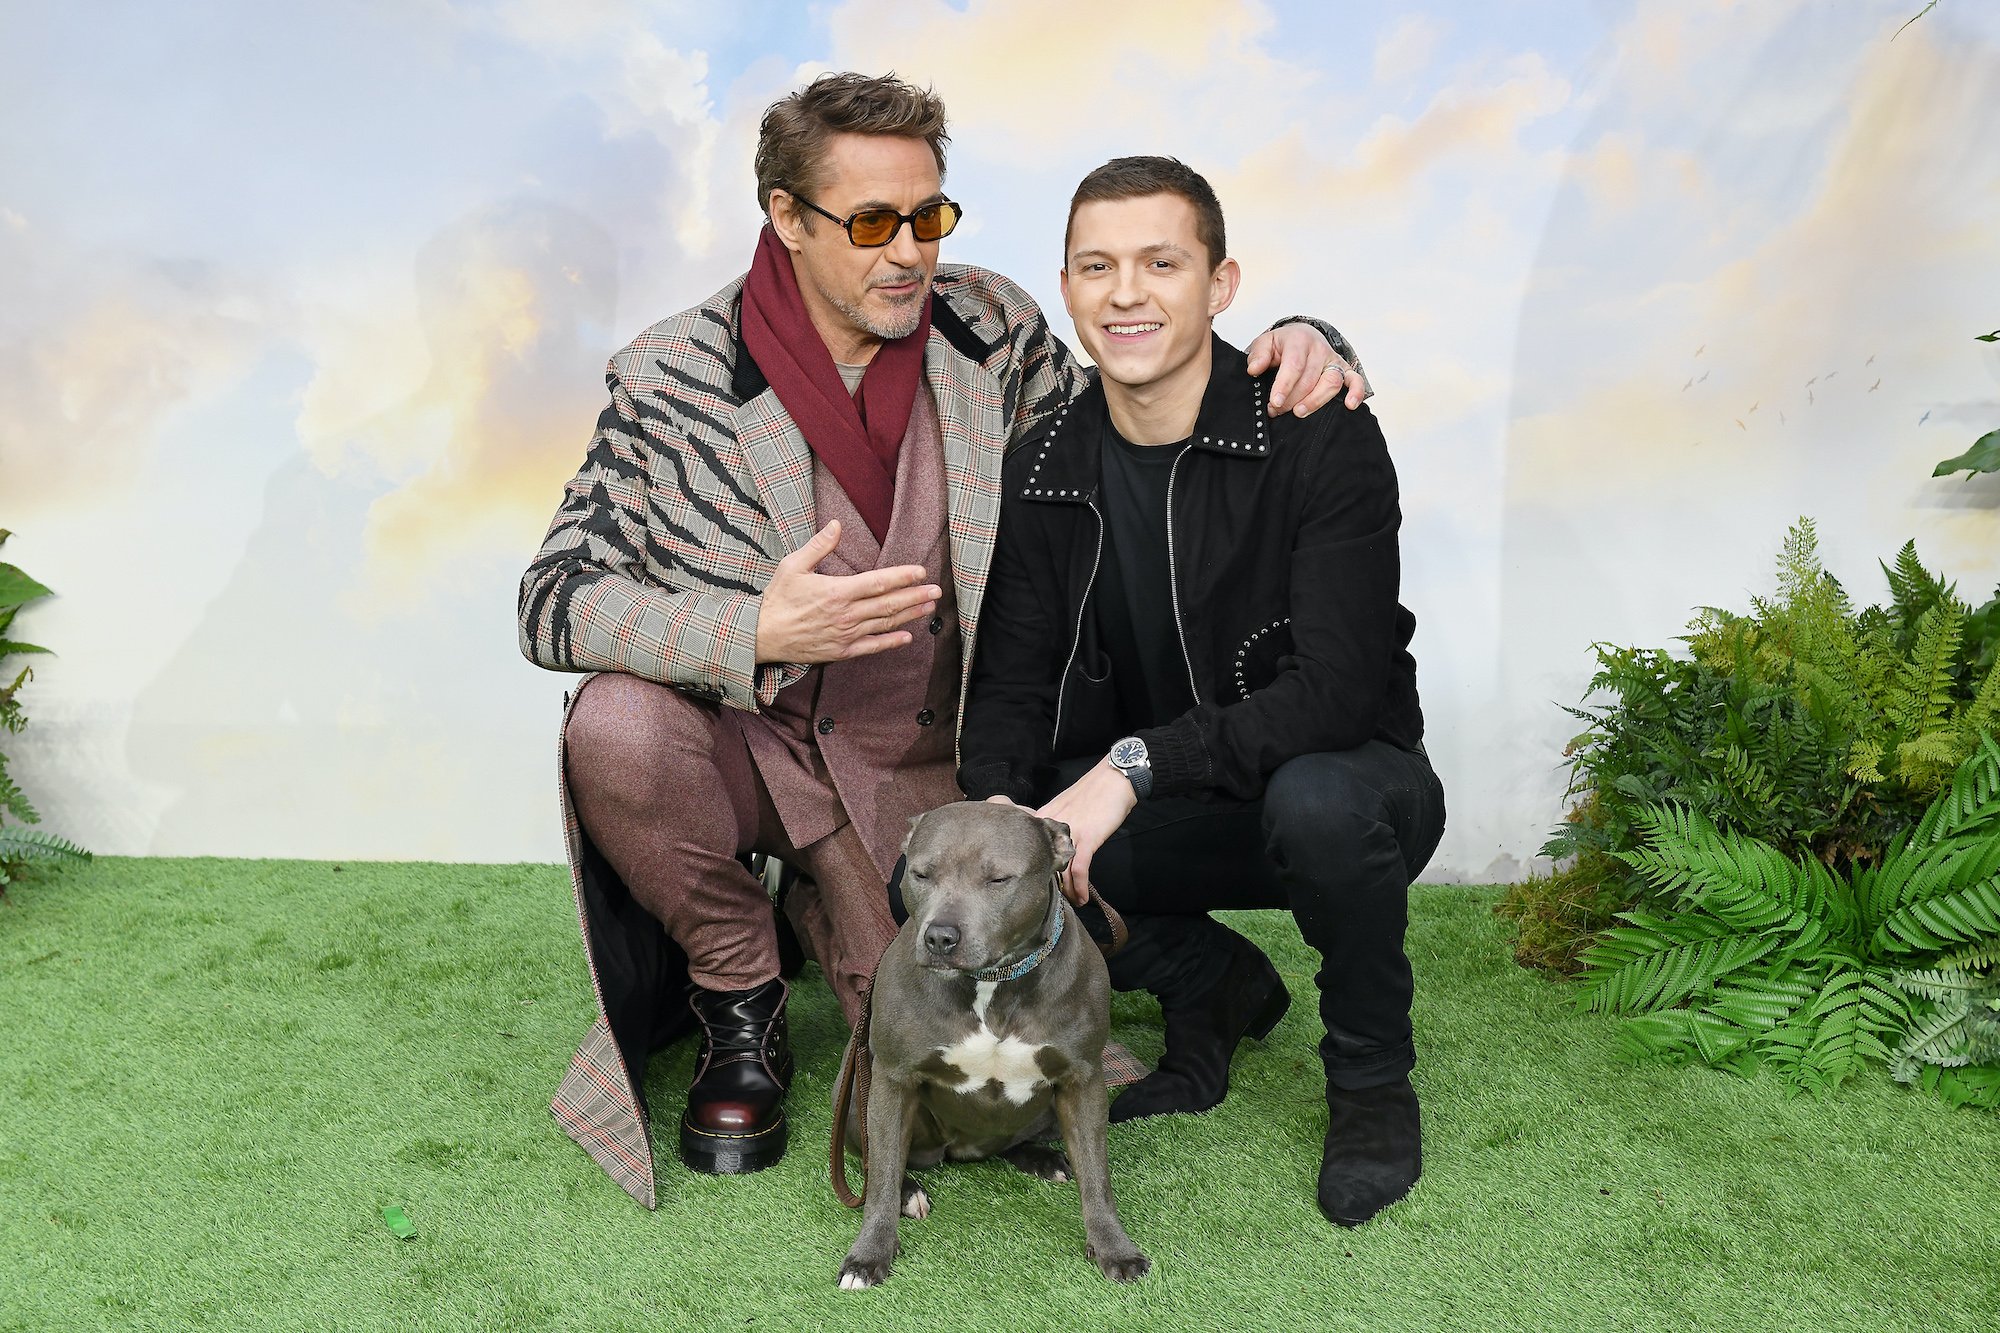 Robert Downey Jr. with his arm around Tom Holland, sitting with a pitbull